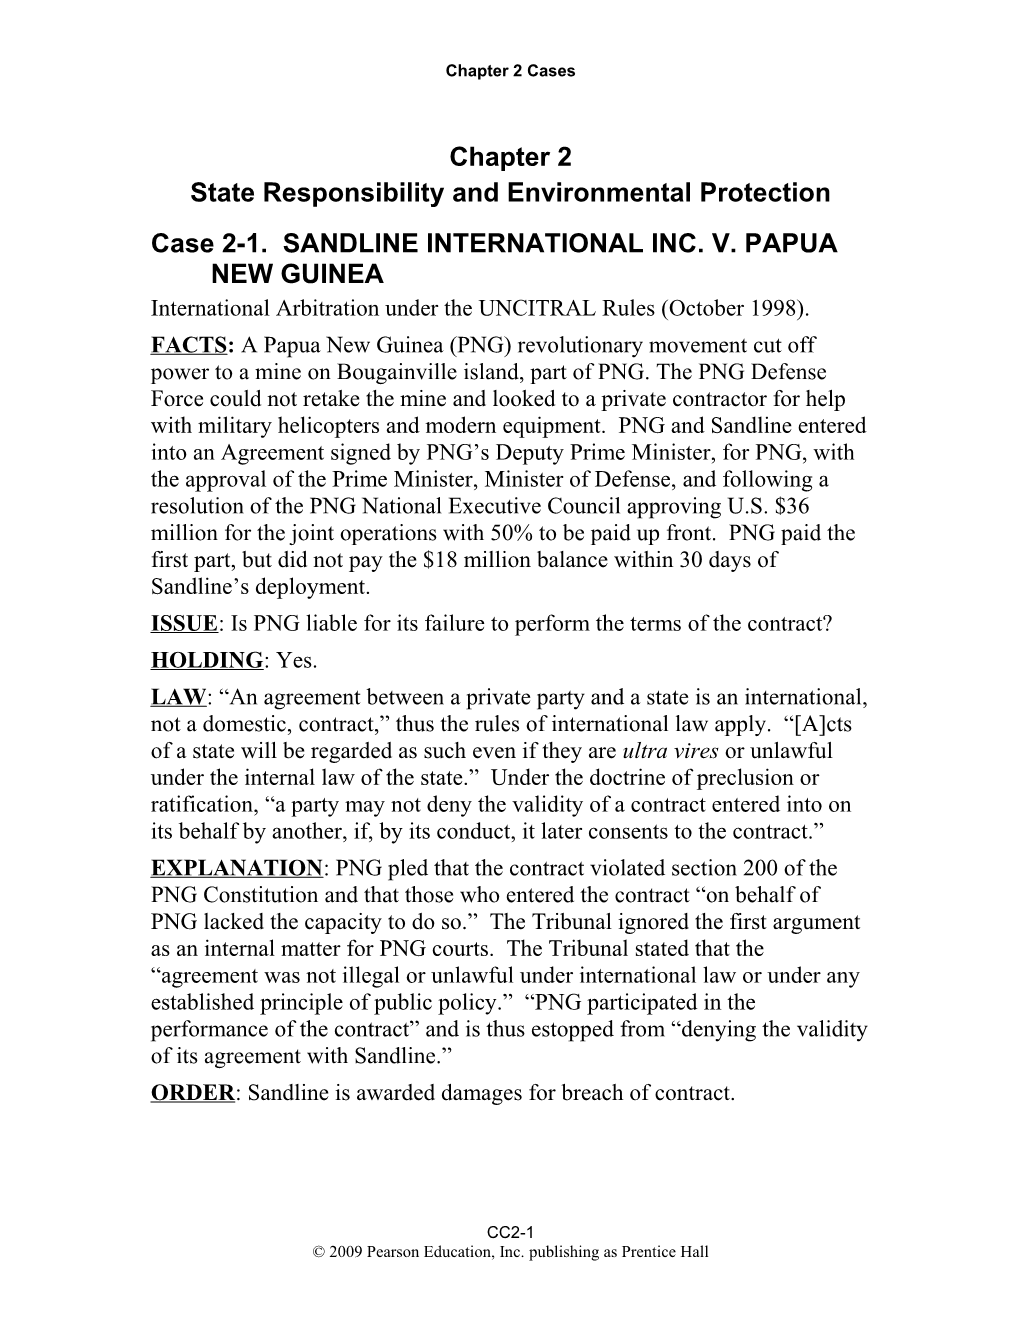 State Responsibility and Environmental Protection